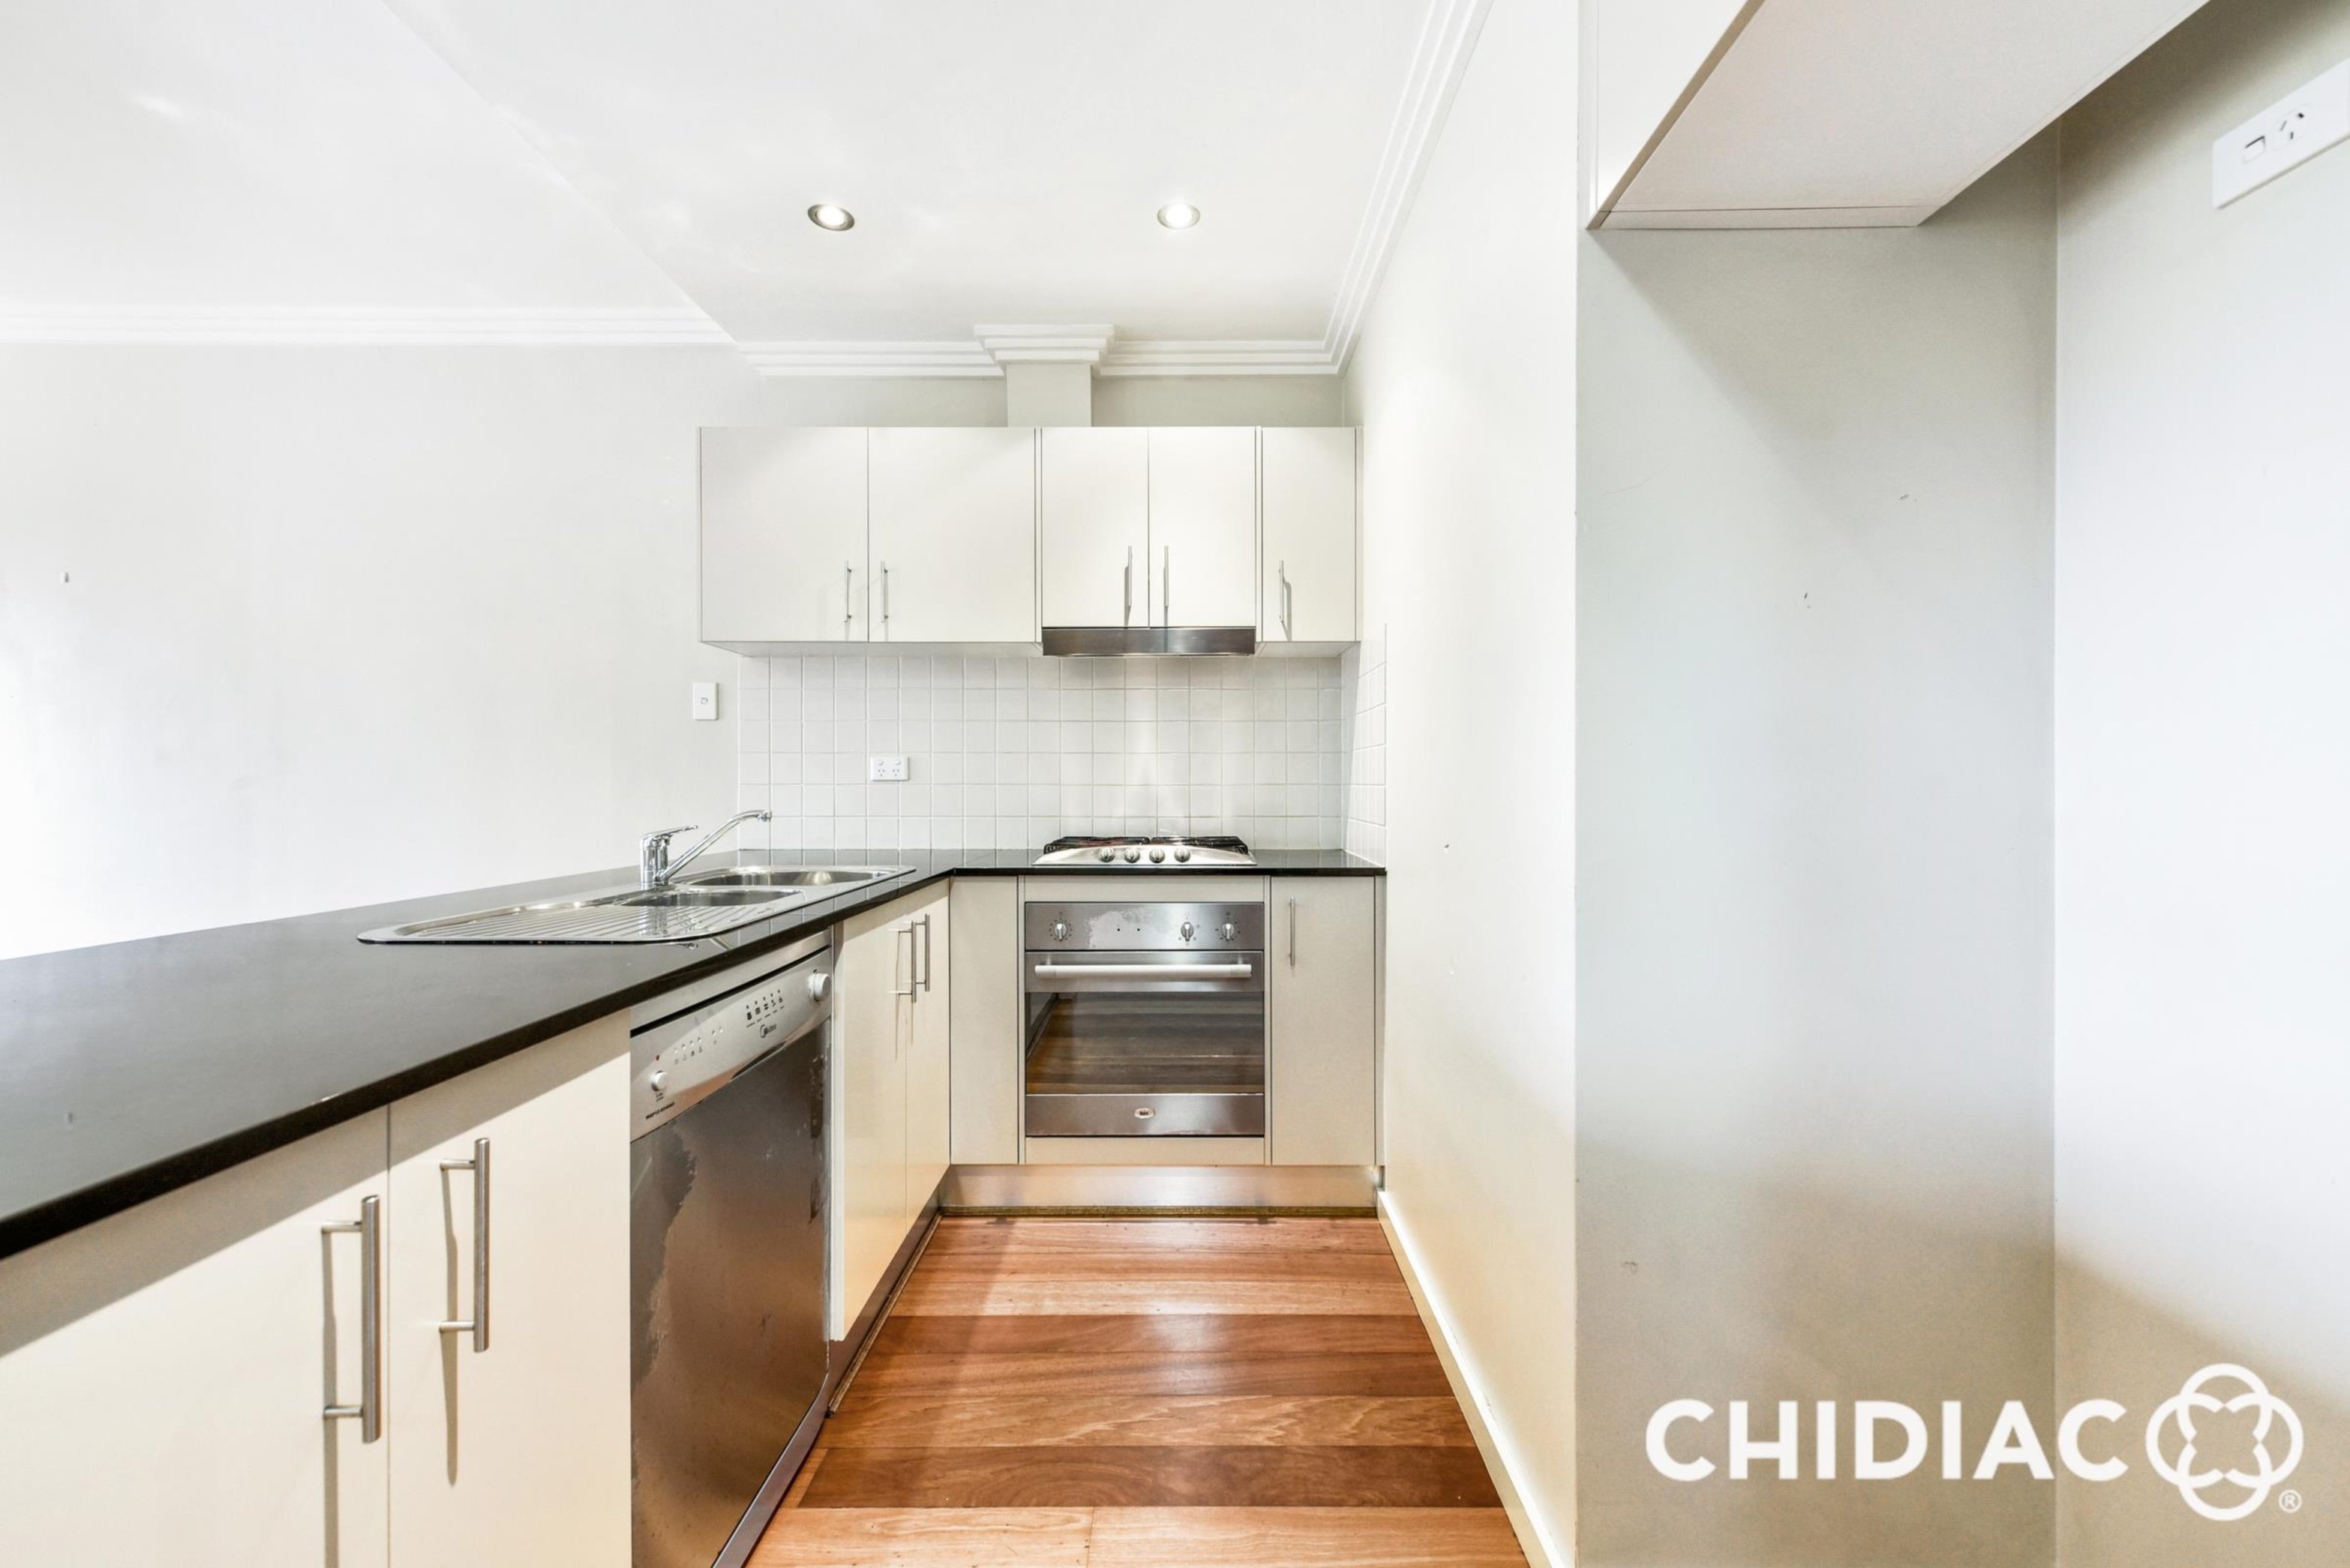 342A Marrickville Road, Marrickville Leased by Chidiac Realty - image 2